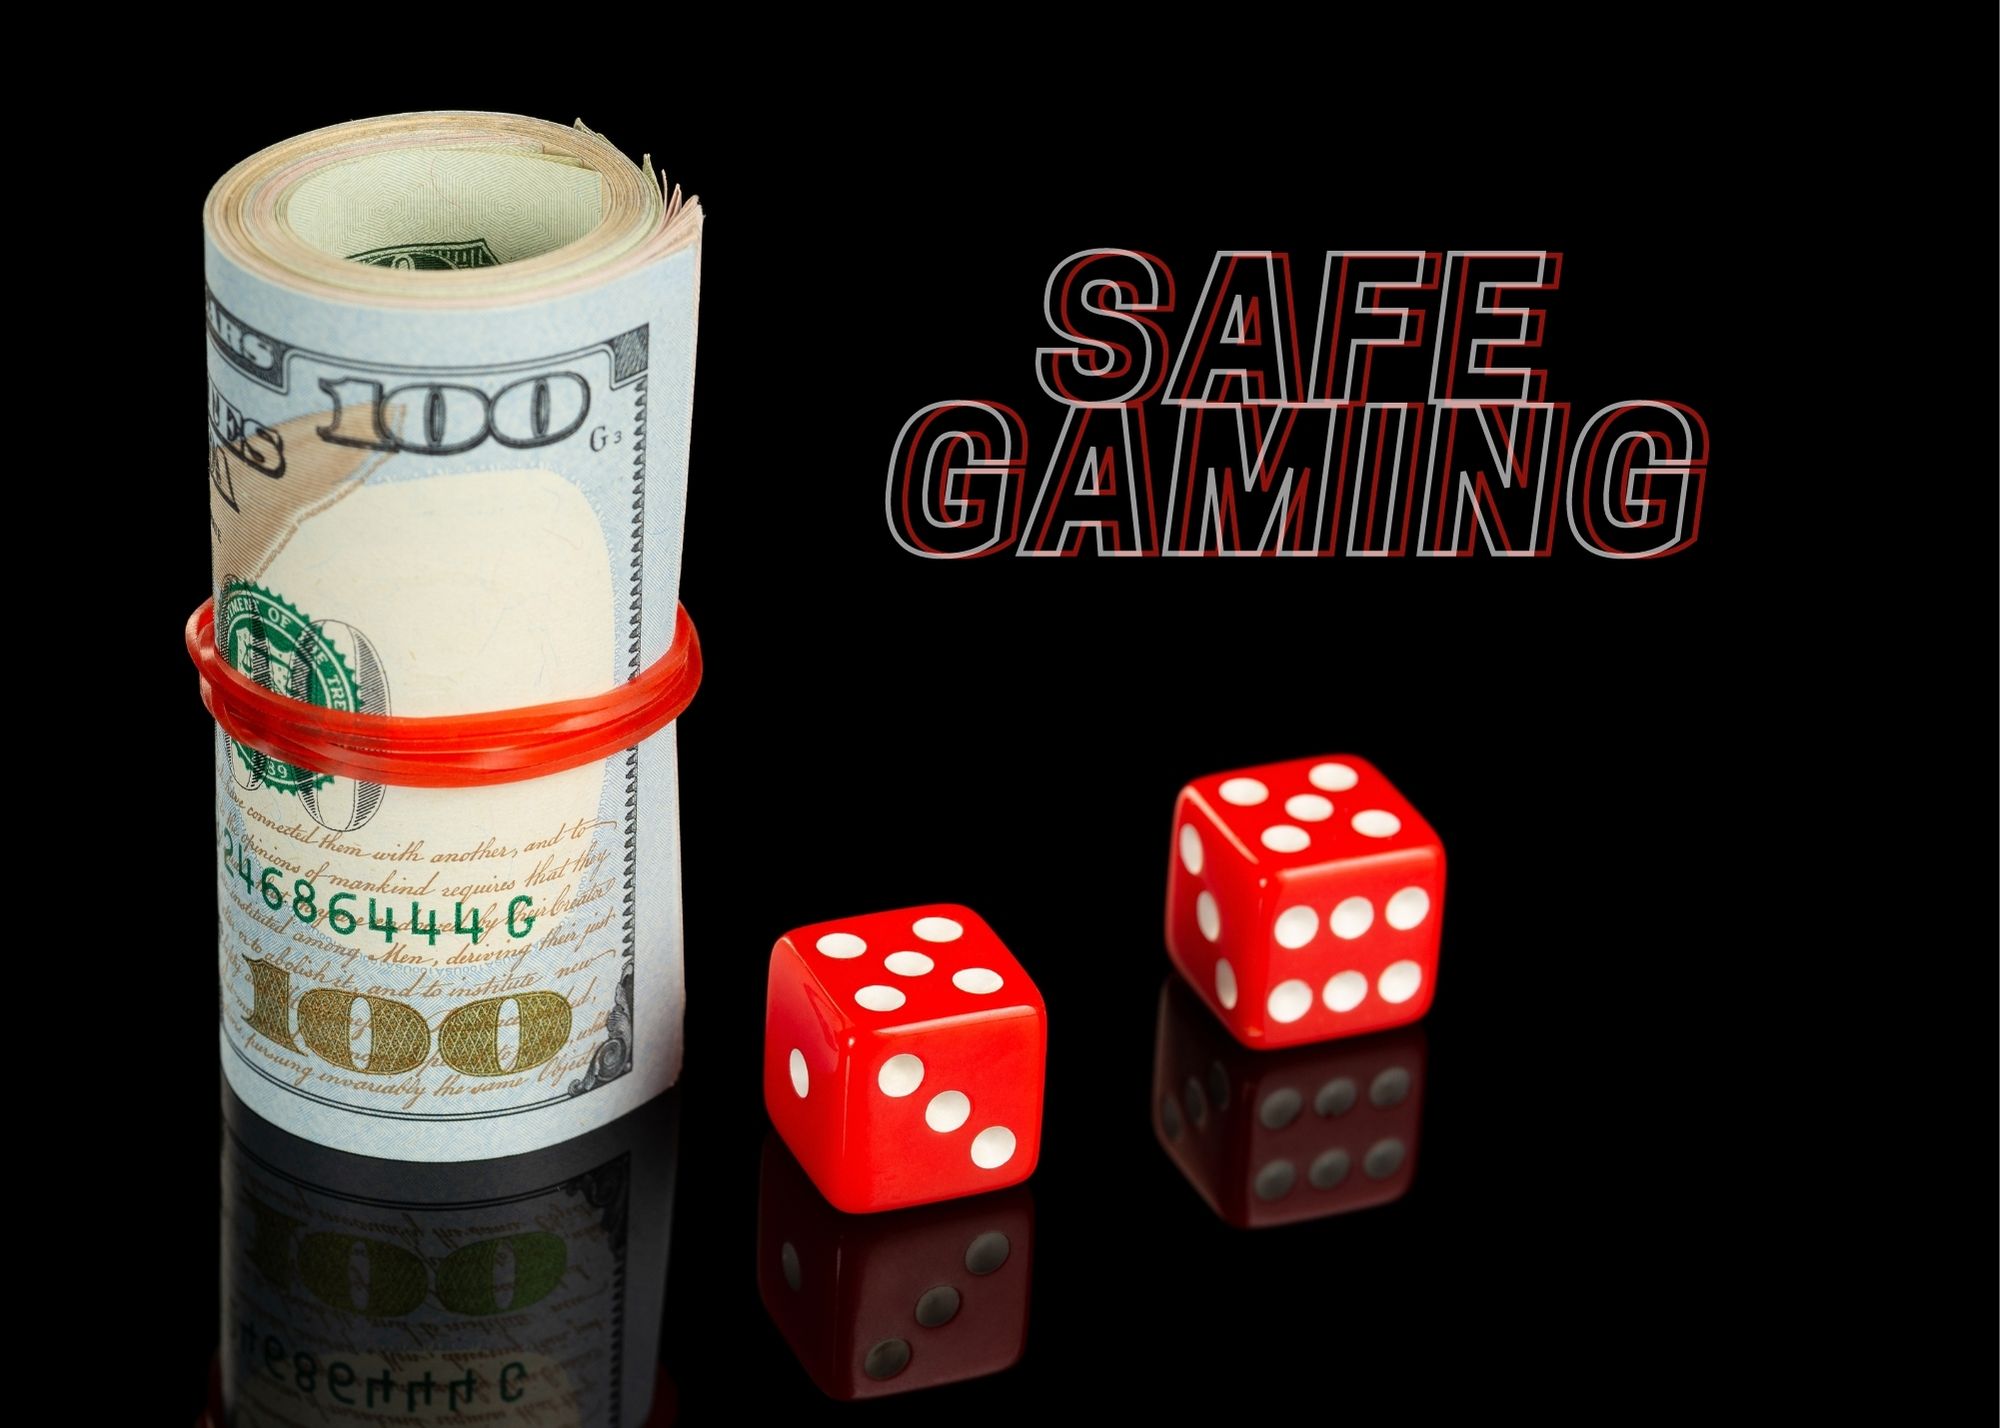 How Affiliates Can Promote Safe Gaming